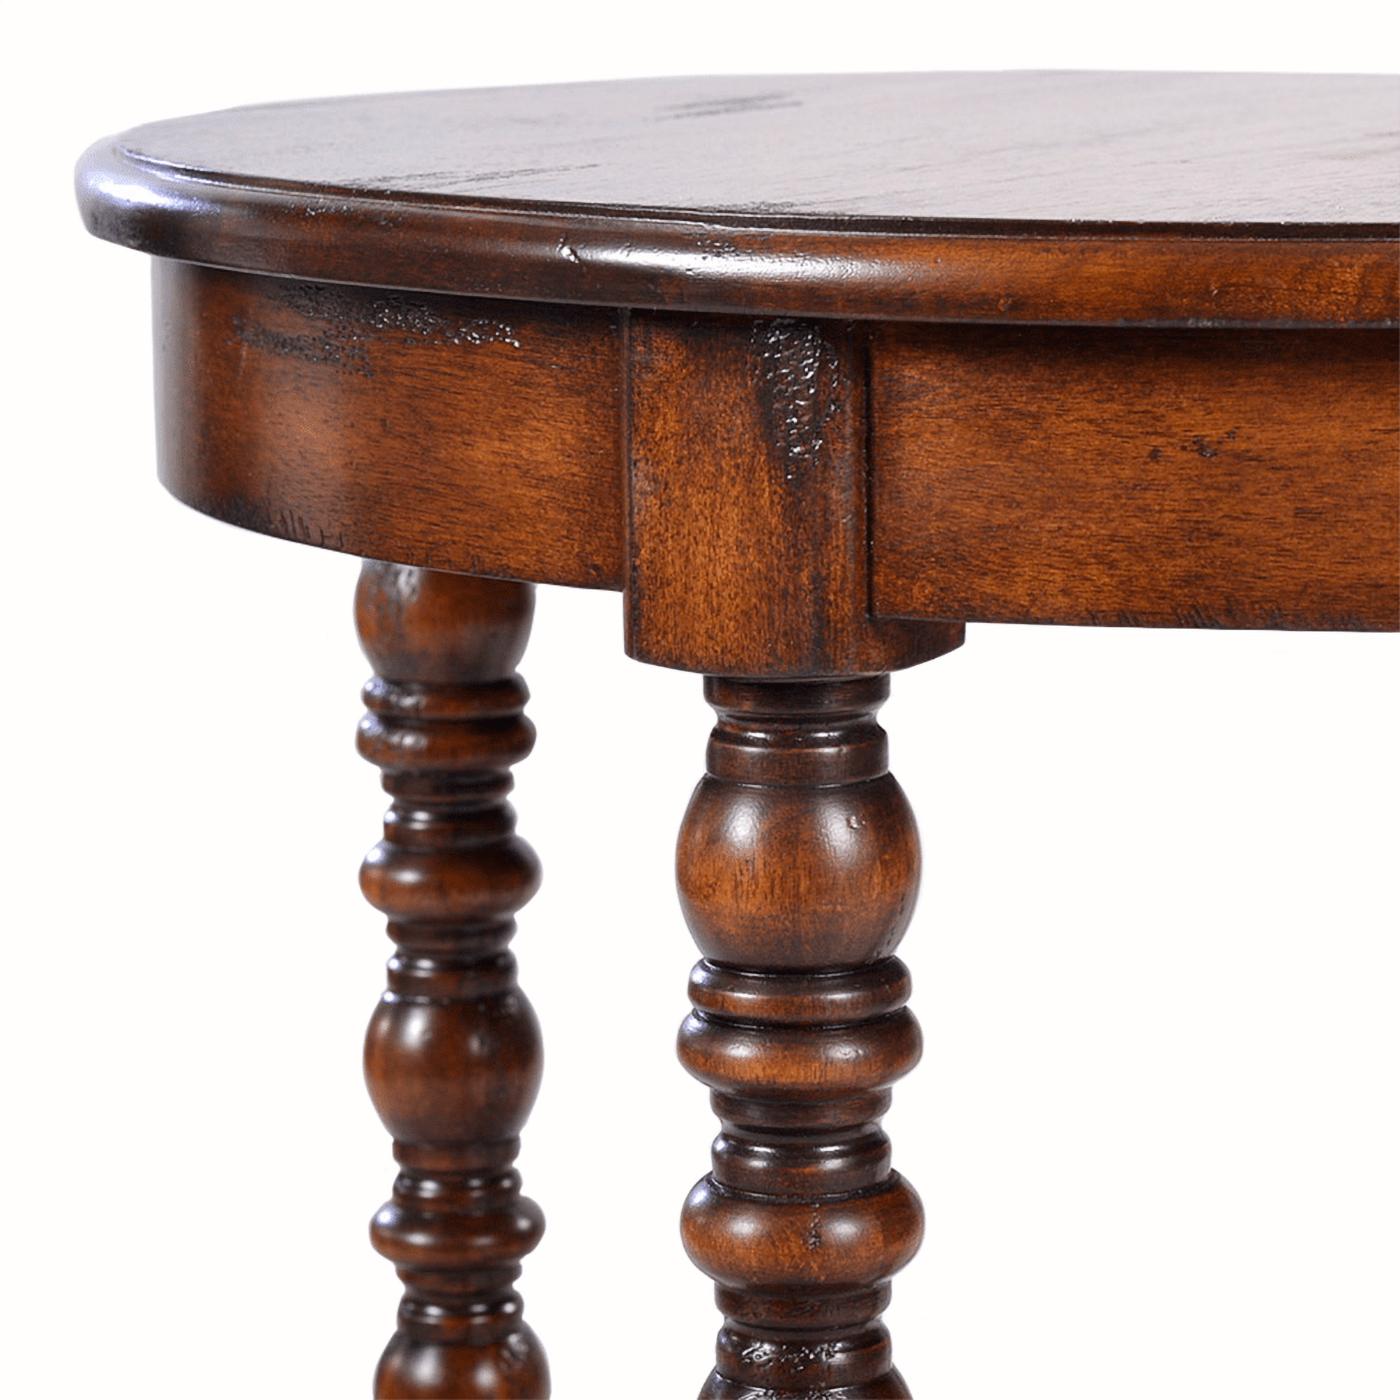 A Jacobean style round side table with an ogee top edge, in our distressed rustic country wood tone with natural highlights, with a hand rubbed satin finish.

Dimensions: 24